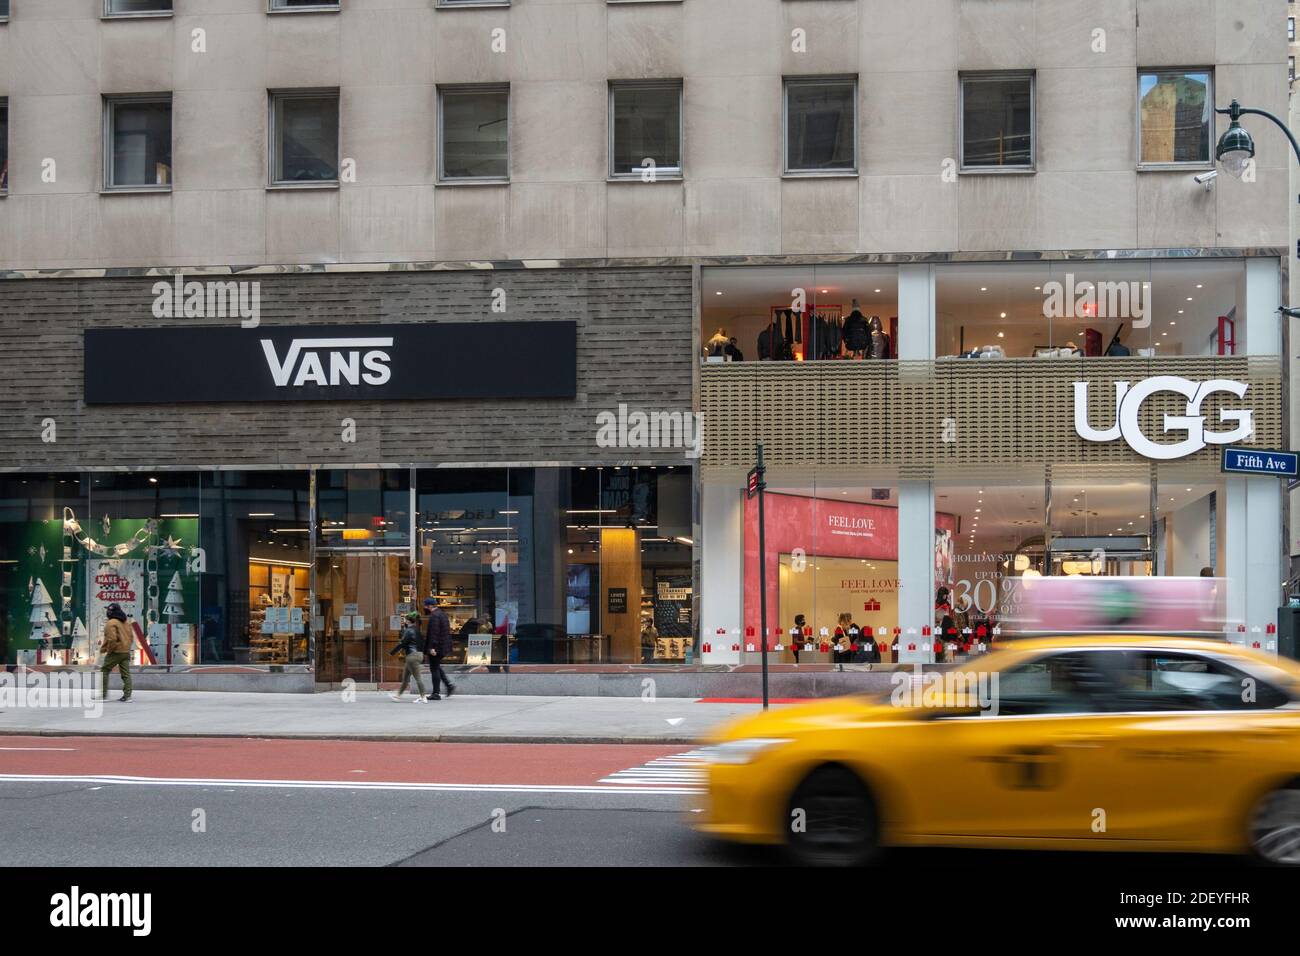 Vans and UGG Storefronts on Fifth Avenue in New York City, USA Stock Photo  - Alamy